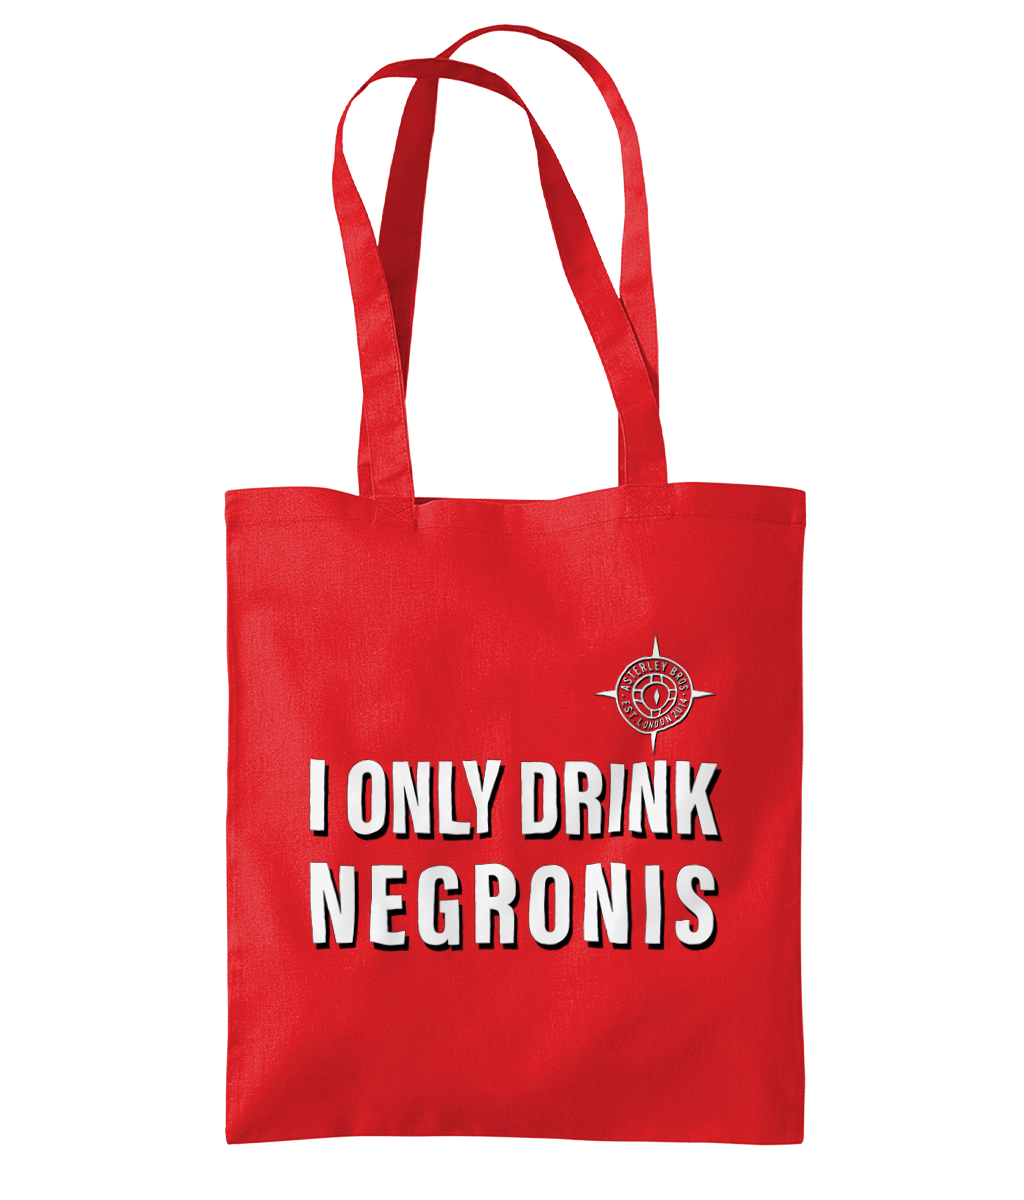 I ONLY DRINK NEGRONIS - THE TOTE